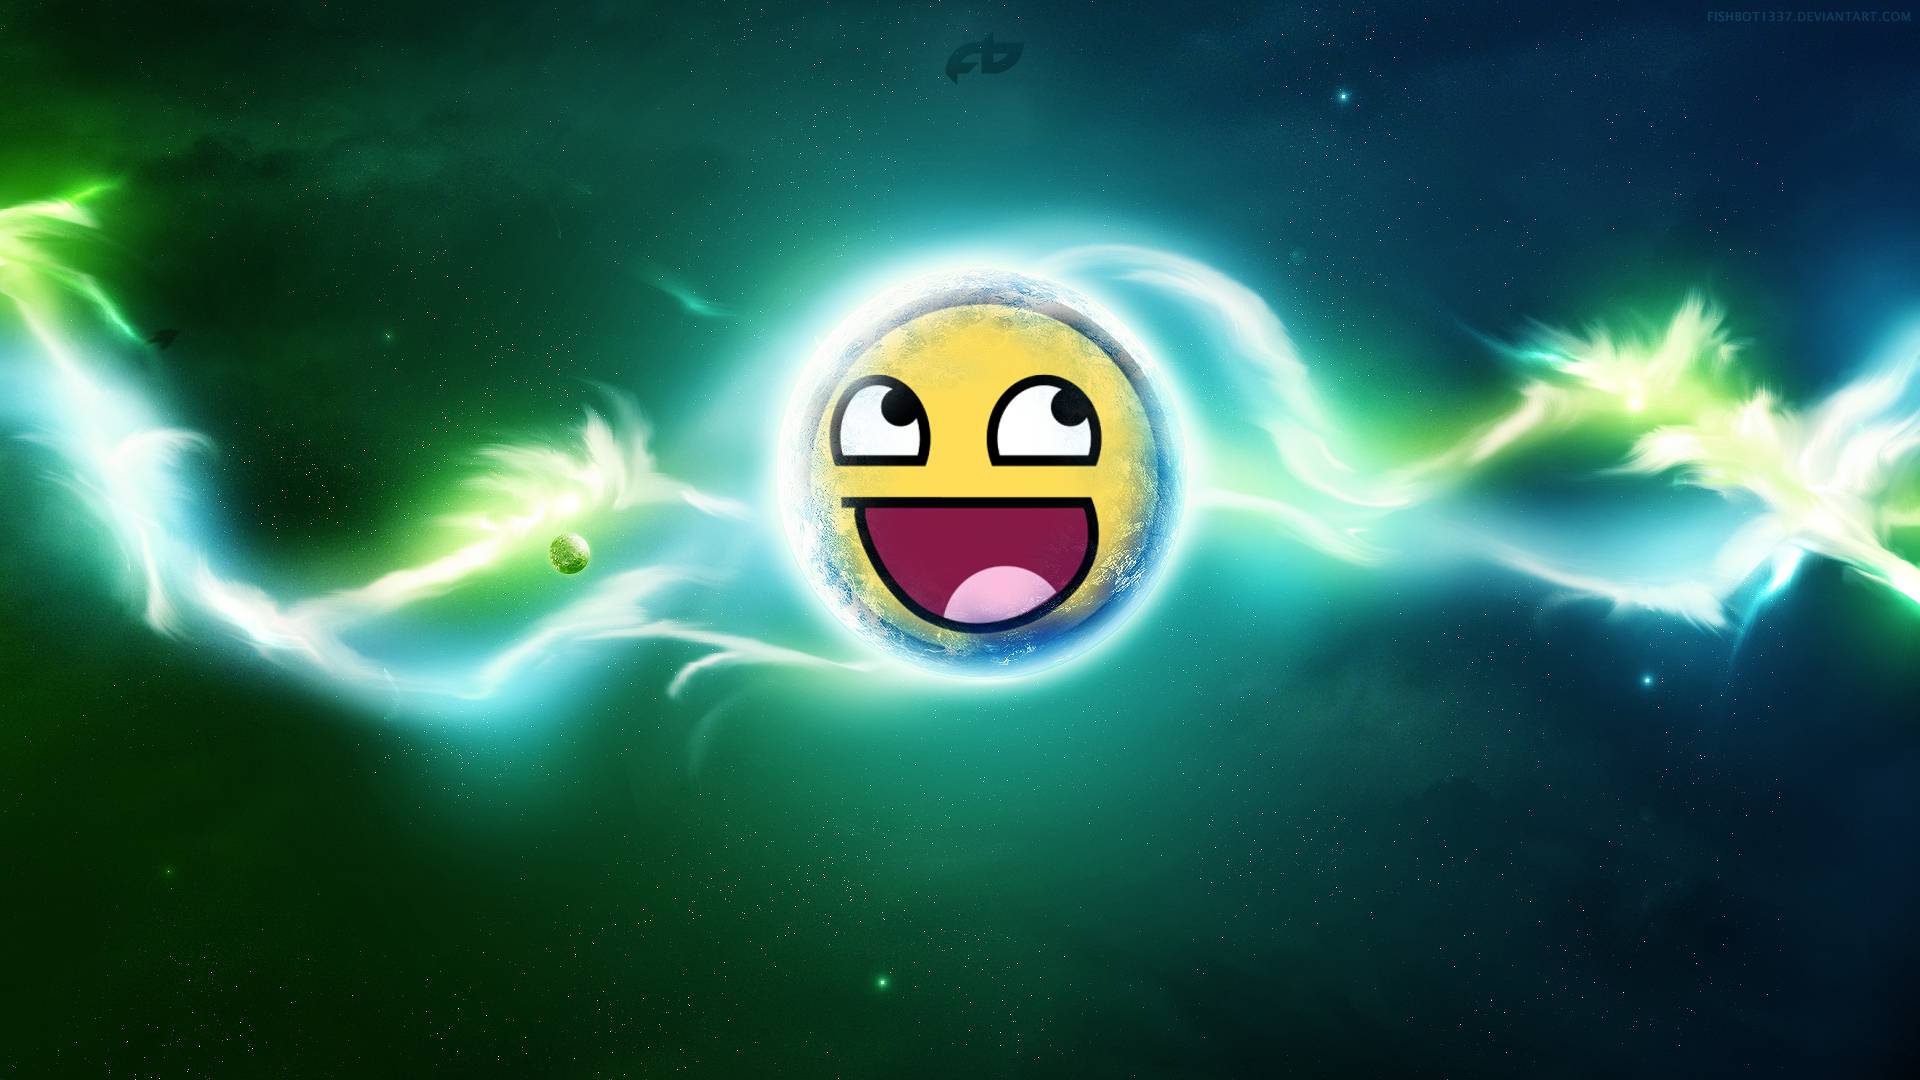 Smiley Wallpapers - Wallpaper Cave